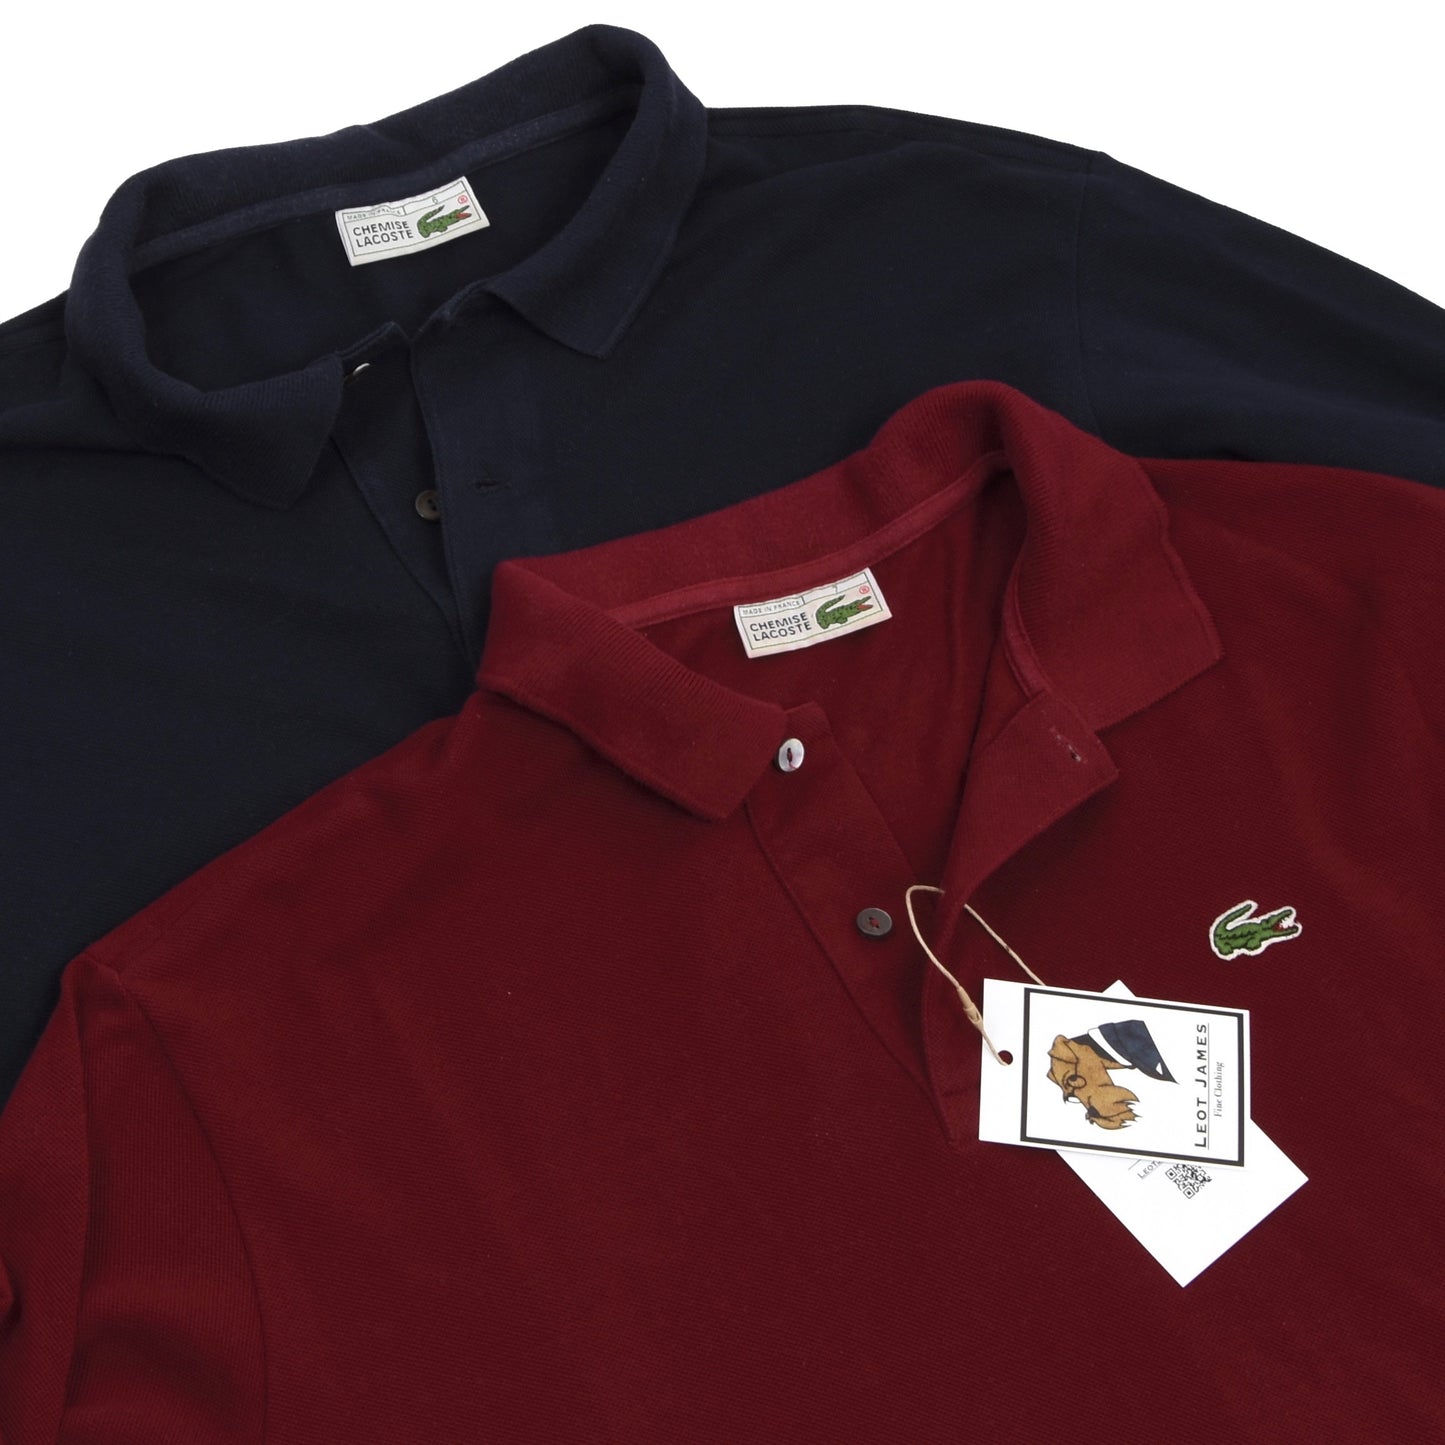 2x Vintage Lacoste Polo Shirts - Red/Navy Blue